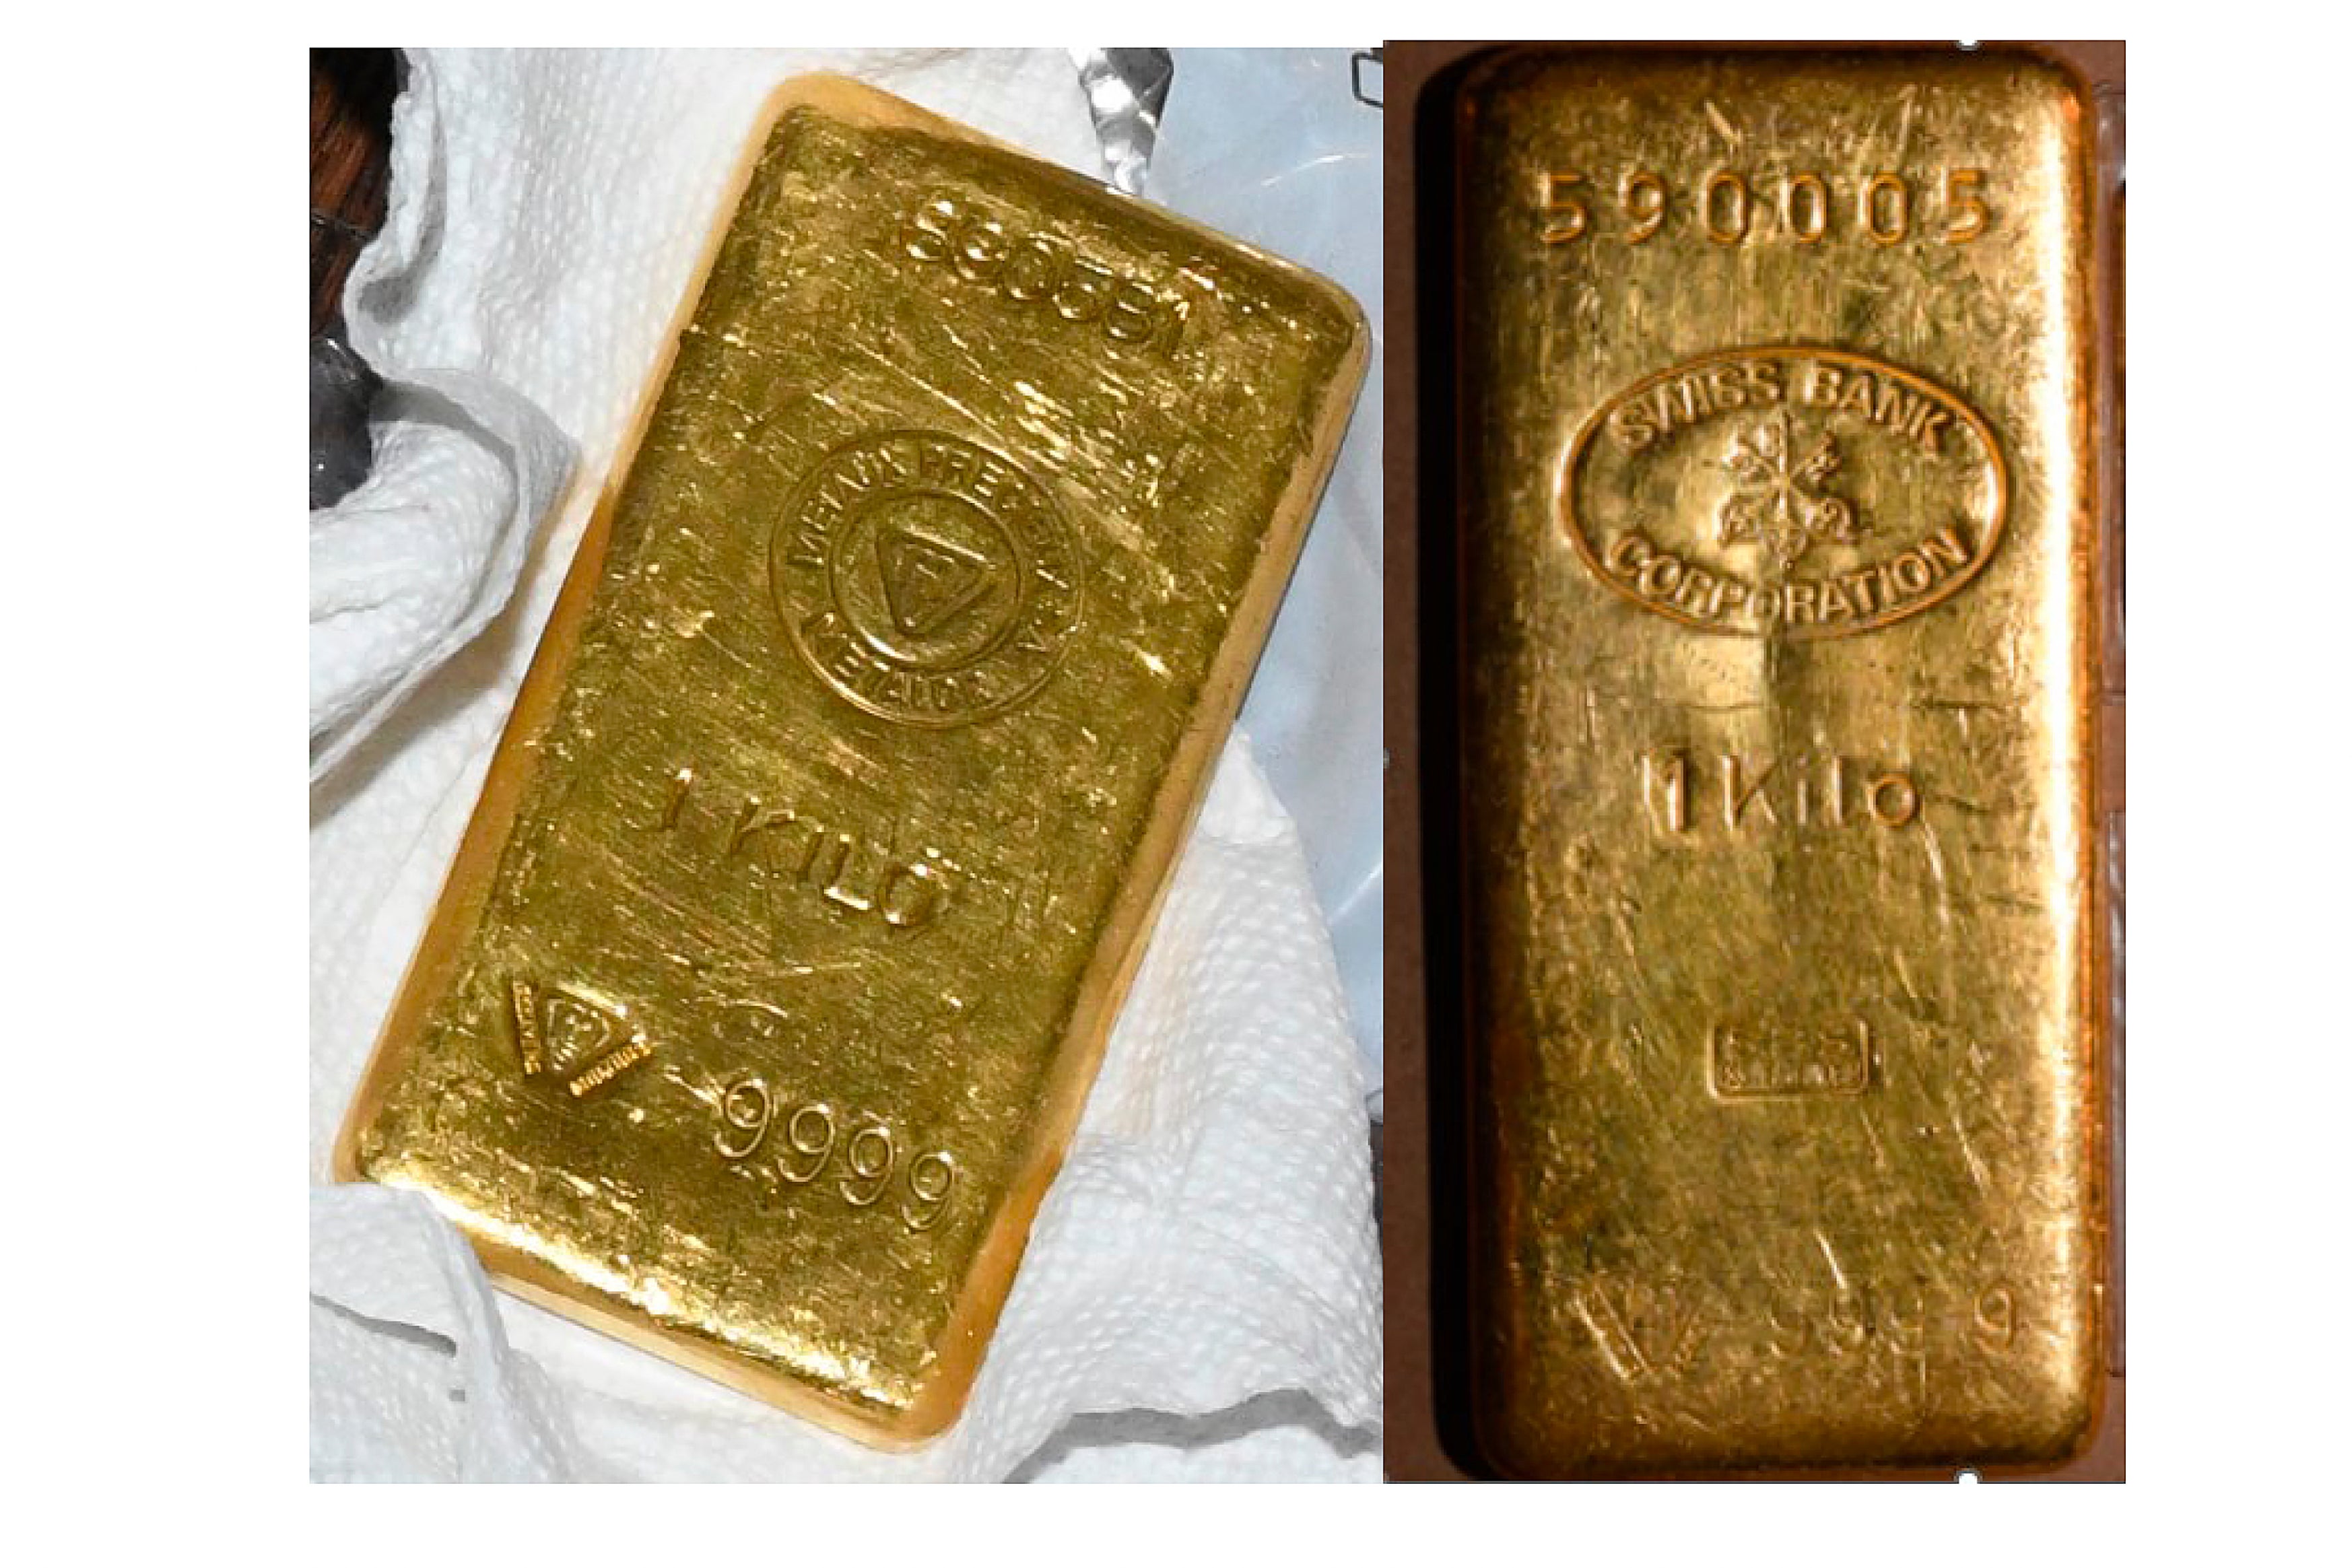 This image shows two of the gold bars found during a search by federal agents of Senator Bob Menendez's home and safe deposit box